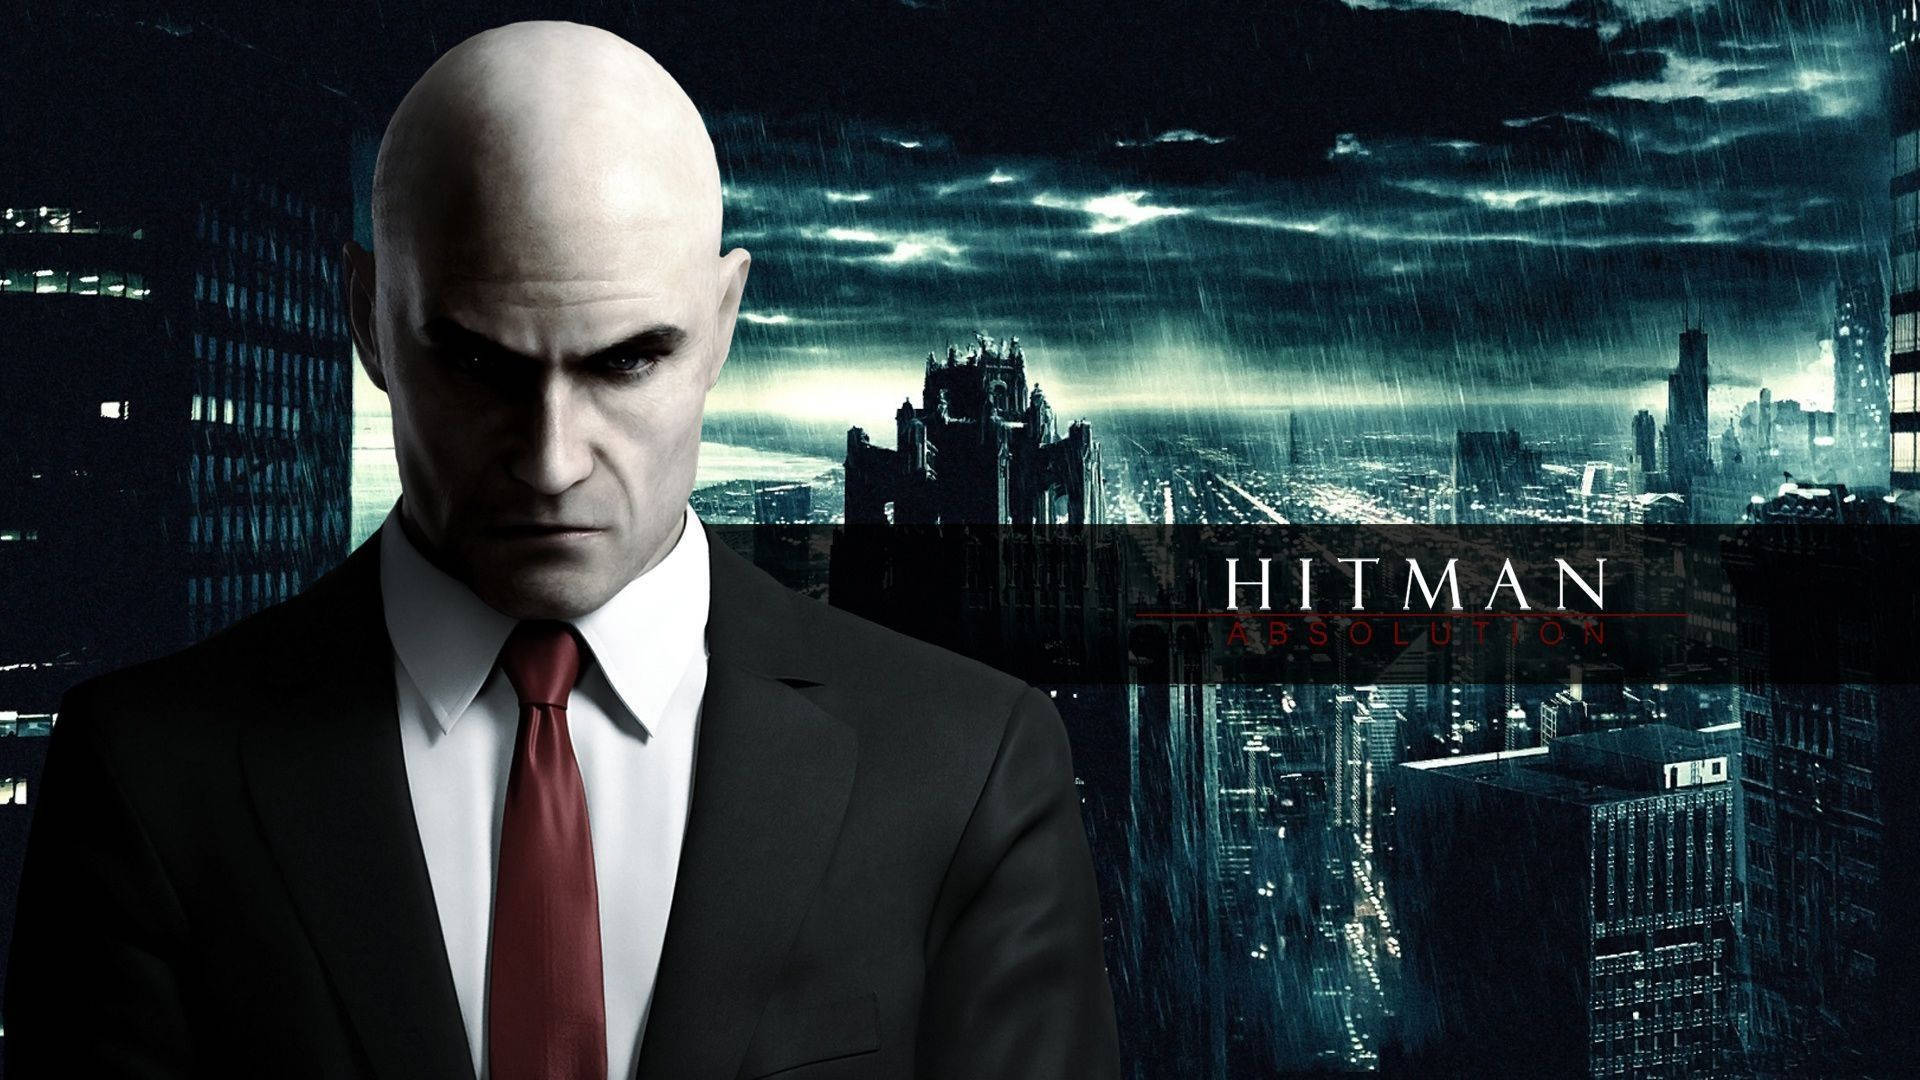 Hitman Absolution Game Poster Background